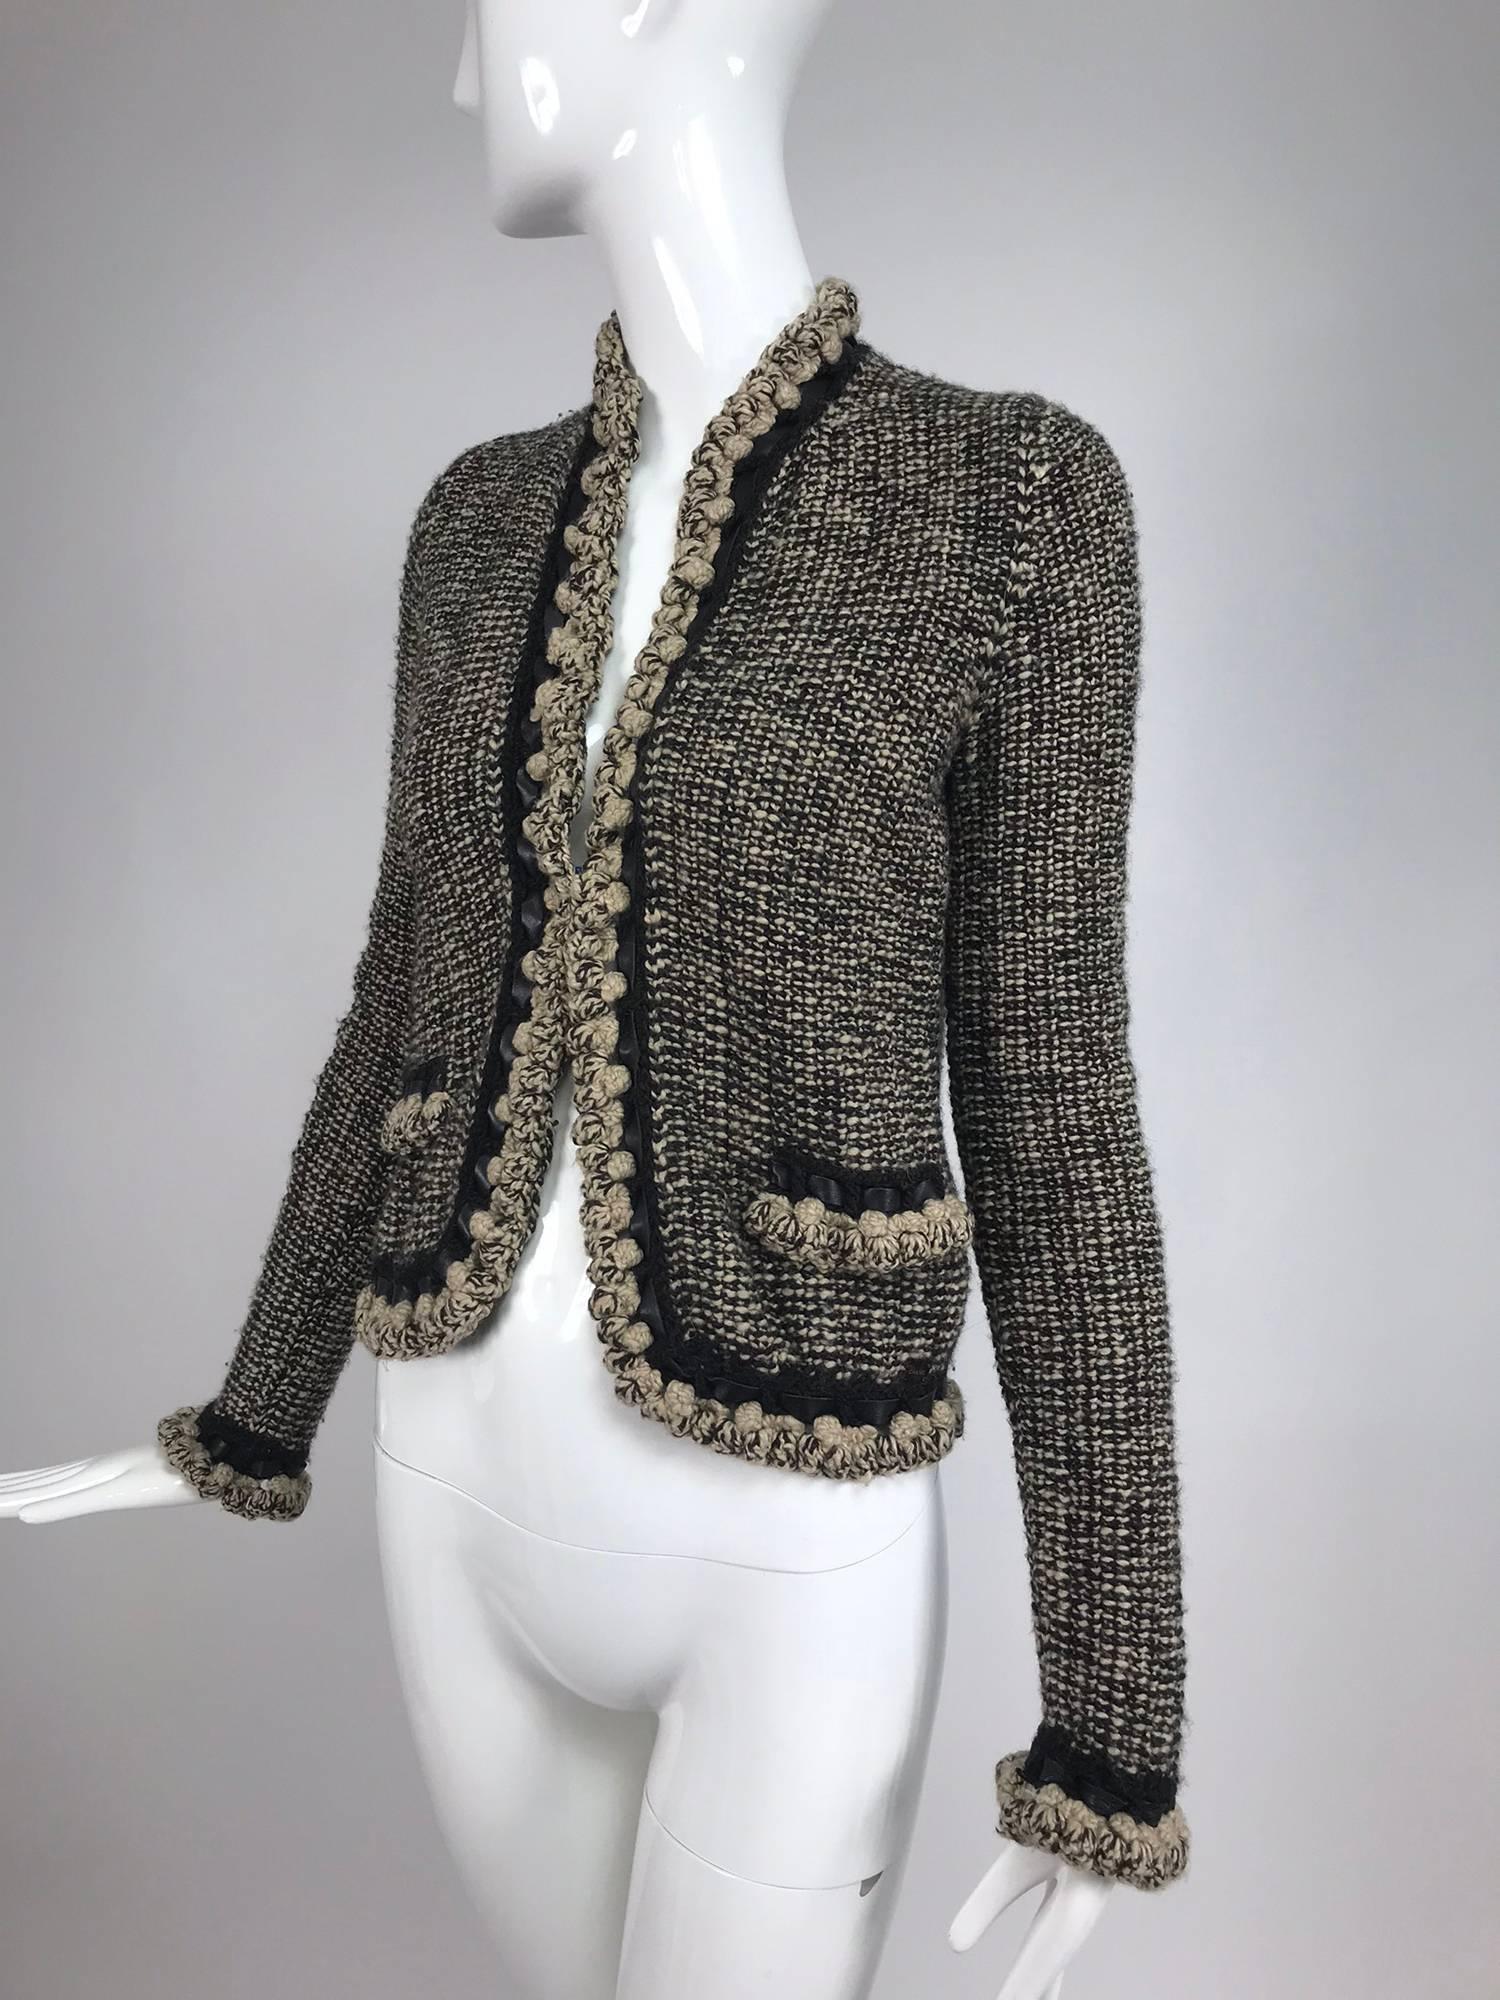 Chanel black and cream cropped leather trimmed jacket 2001A...Unlined jacket with chunky knit trim that that has leather woven in, front band pockets...This jacket has the feel of a mid weight sweater...No closures at the front...Marked size